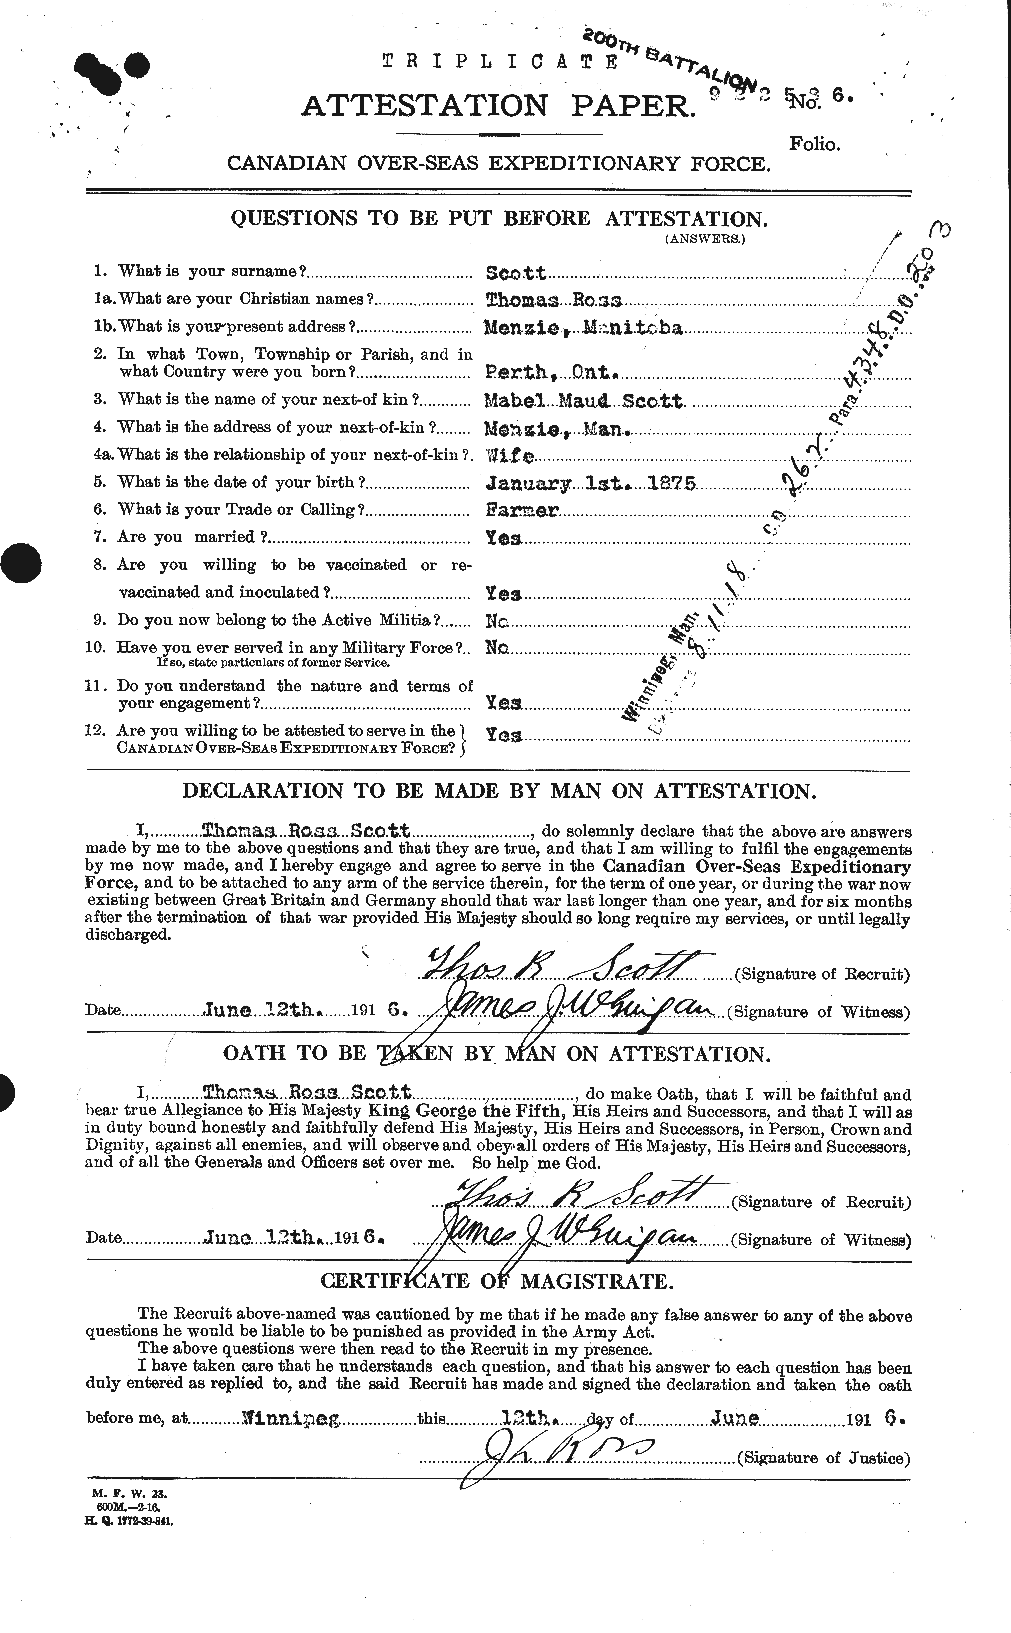 Personnel Records of the First World War - CEF 088223a